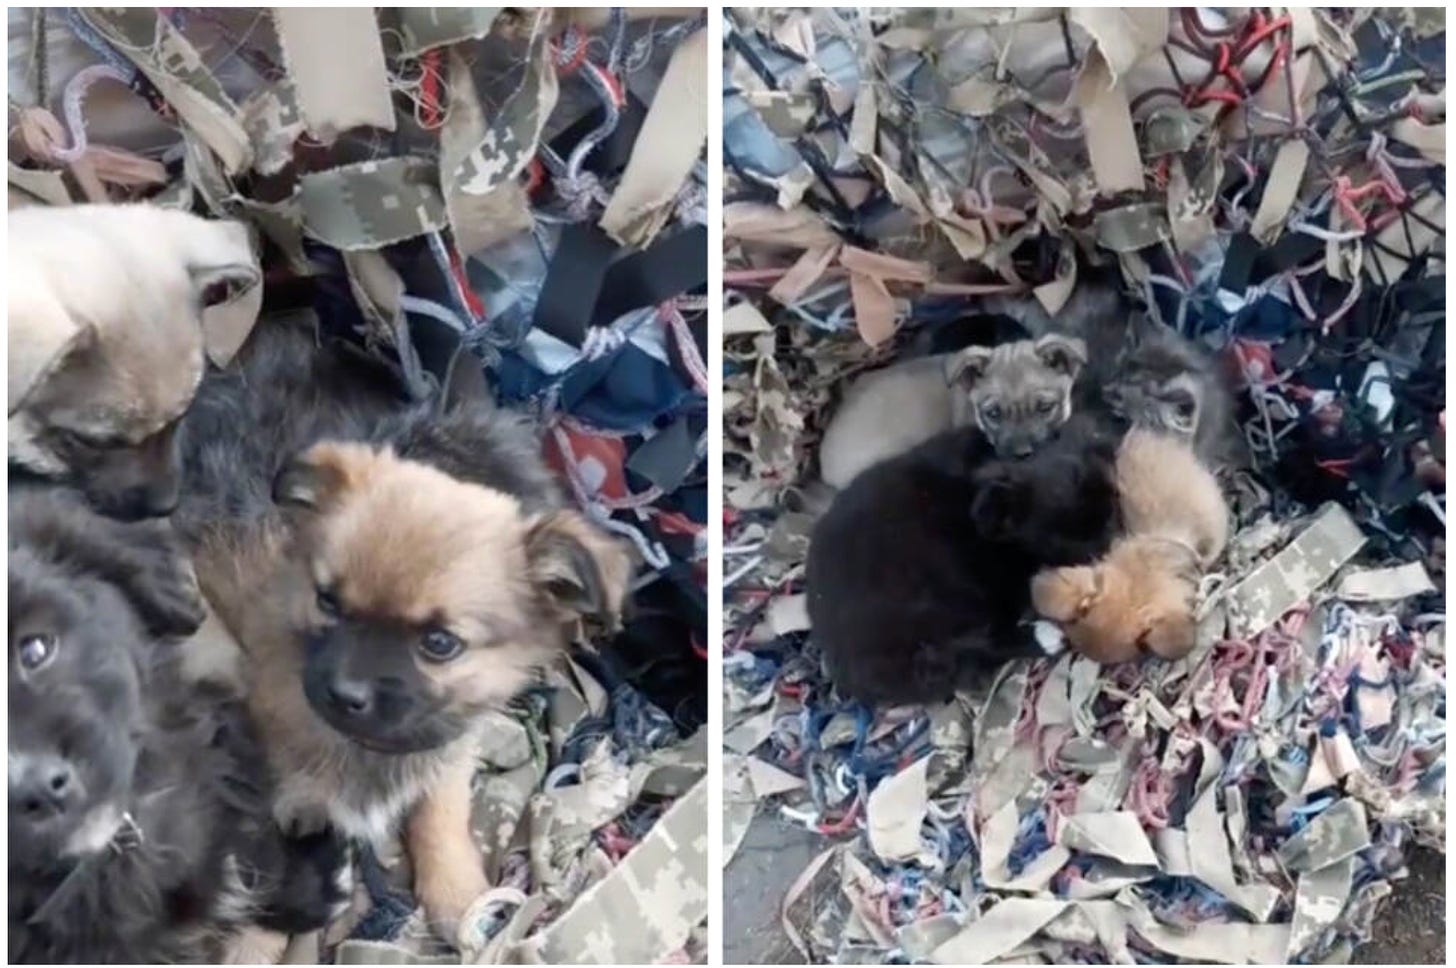 puppies protecting kittens from war in Ukraine amidst rubble